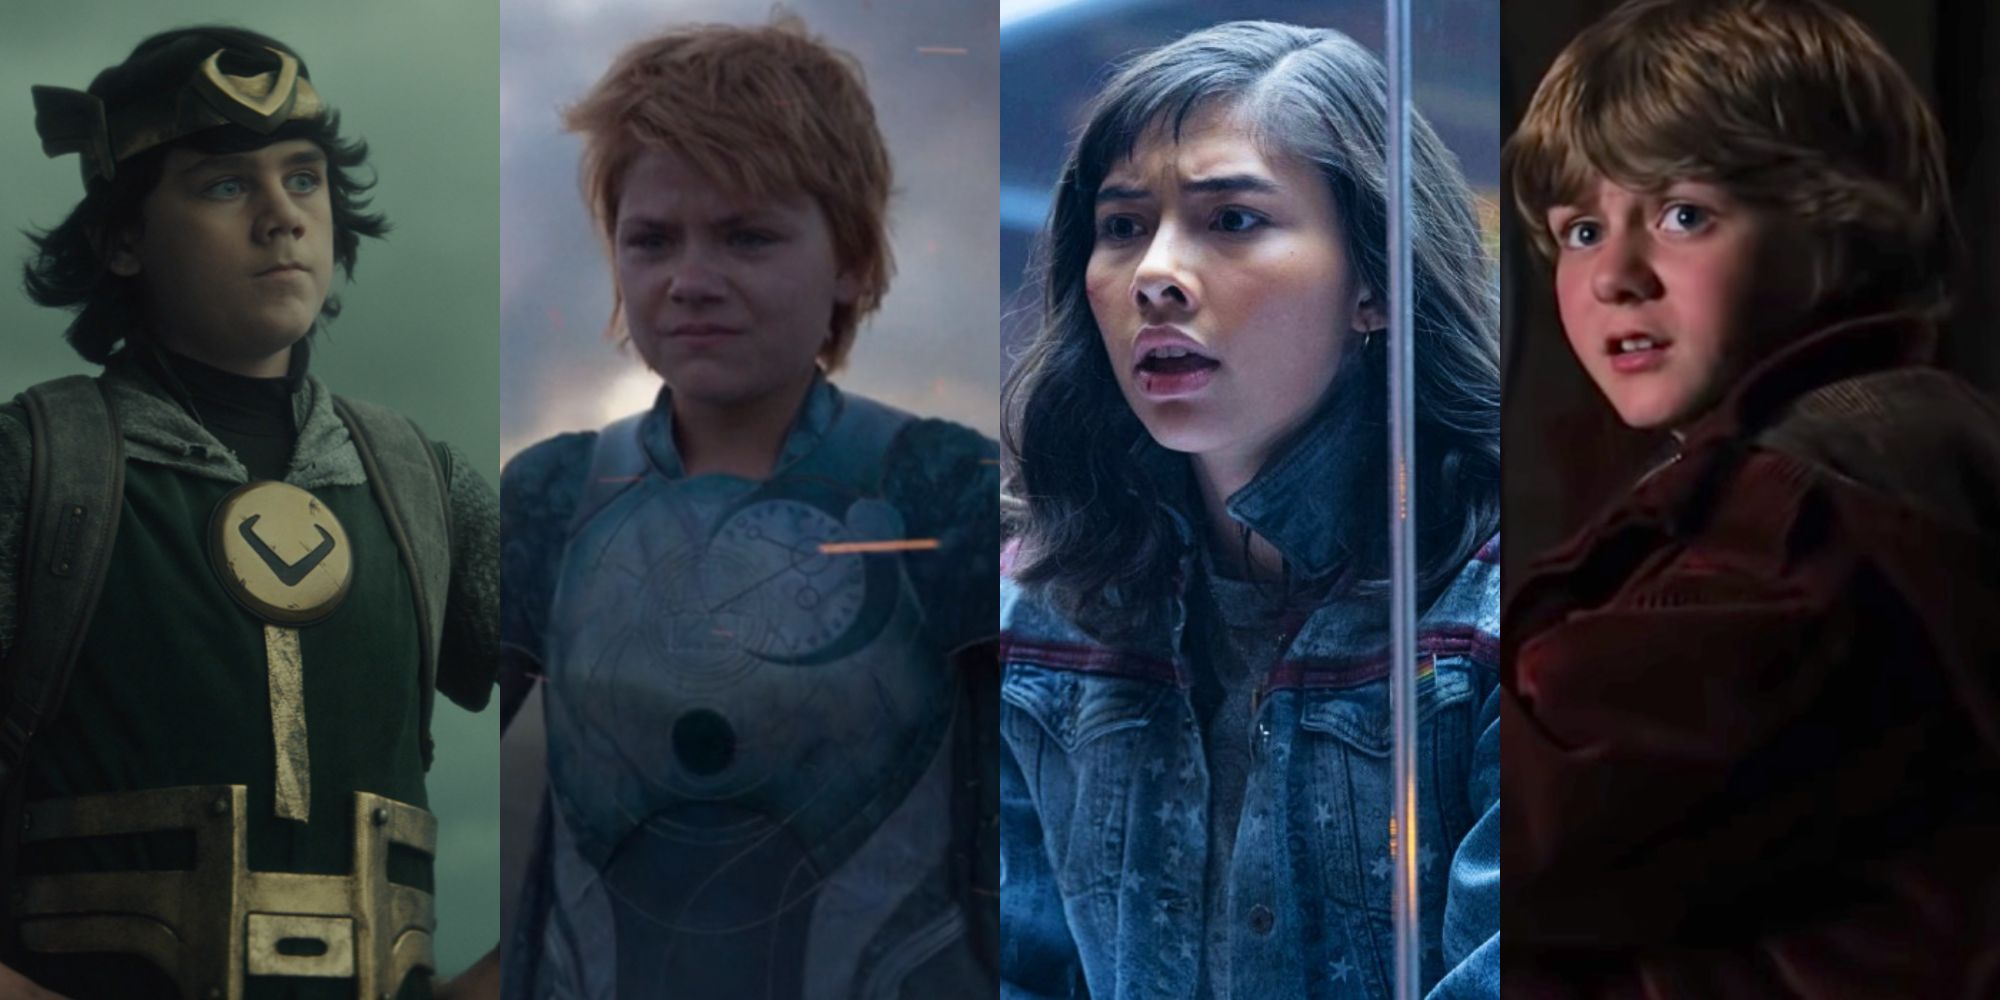 A split image of child actors in the MCU.